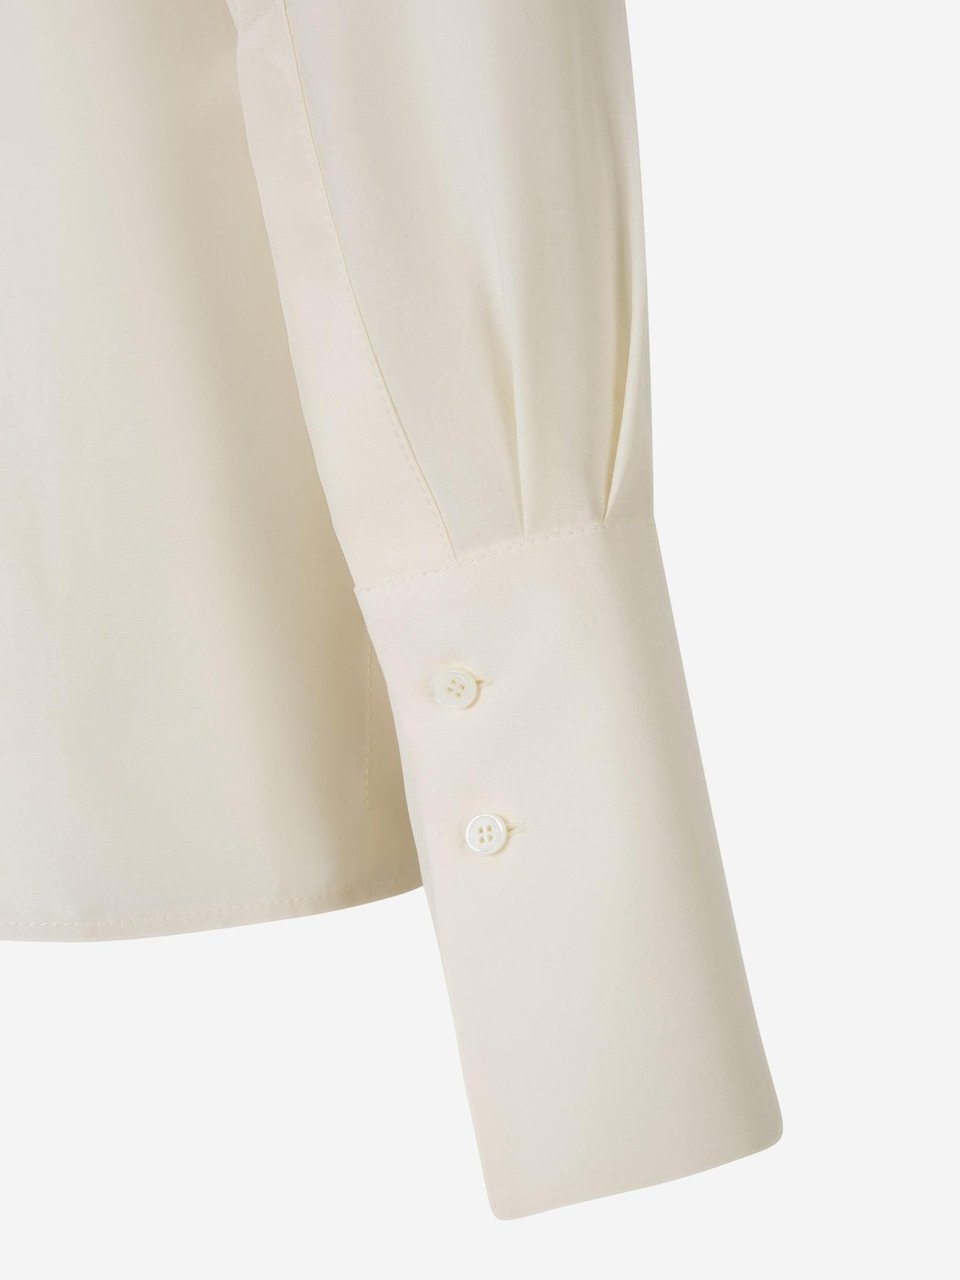 Givenchy Silk Cross Blouse Beige